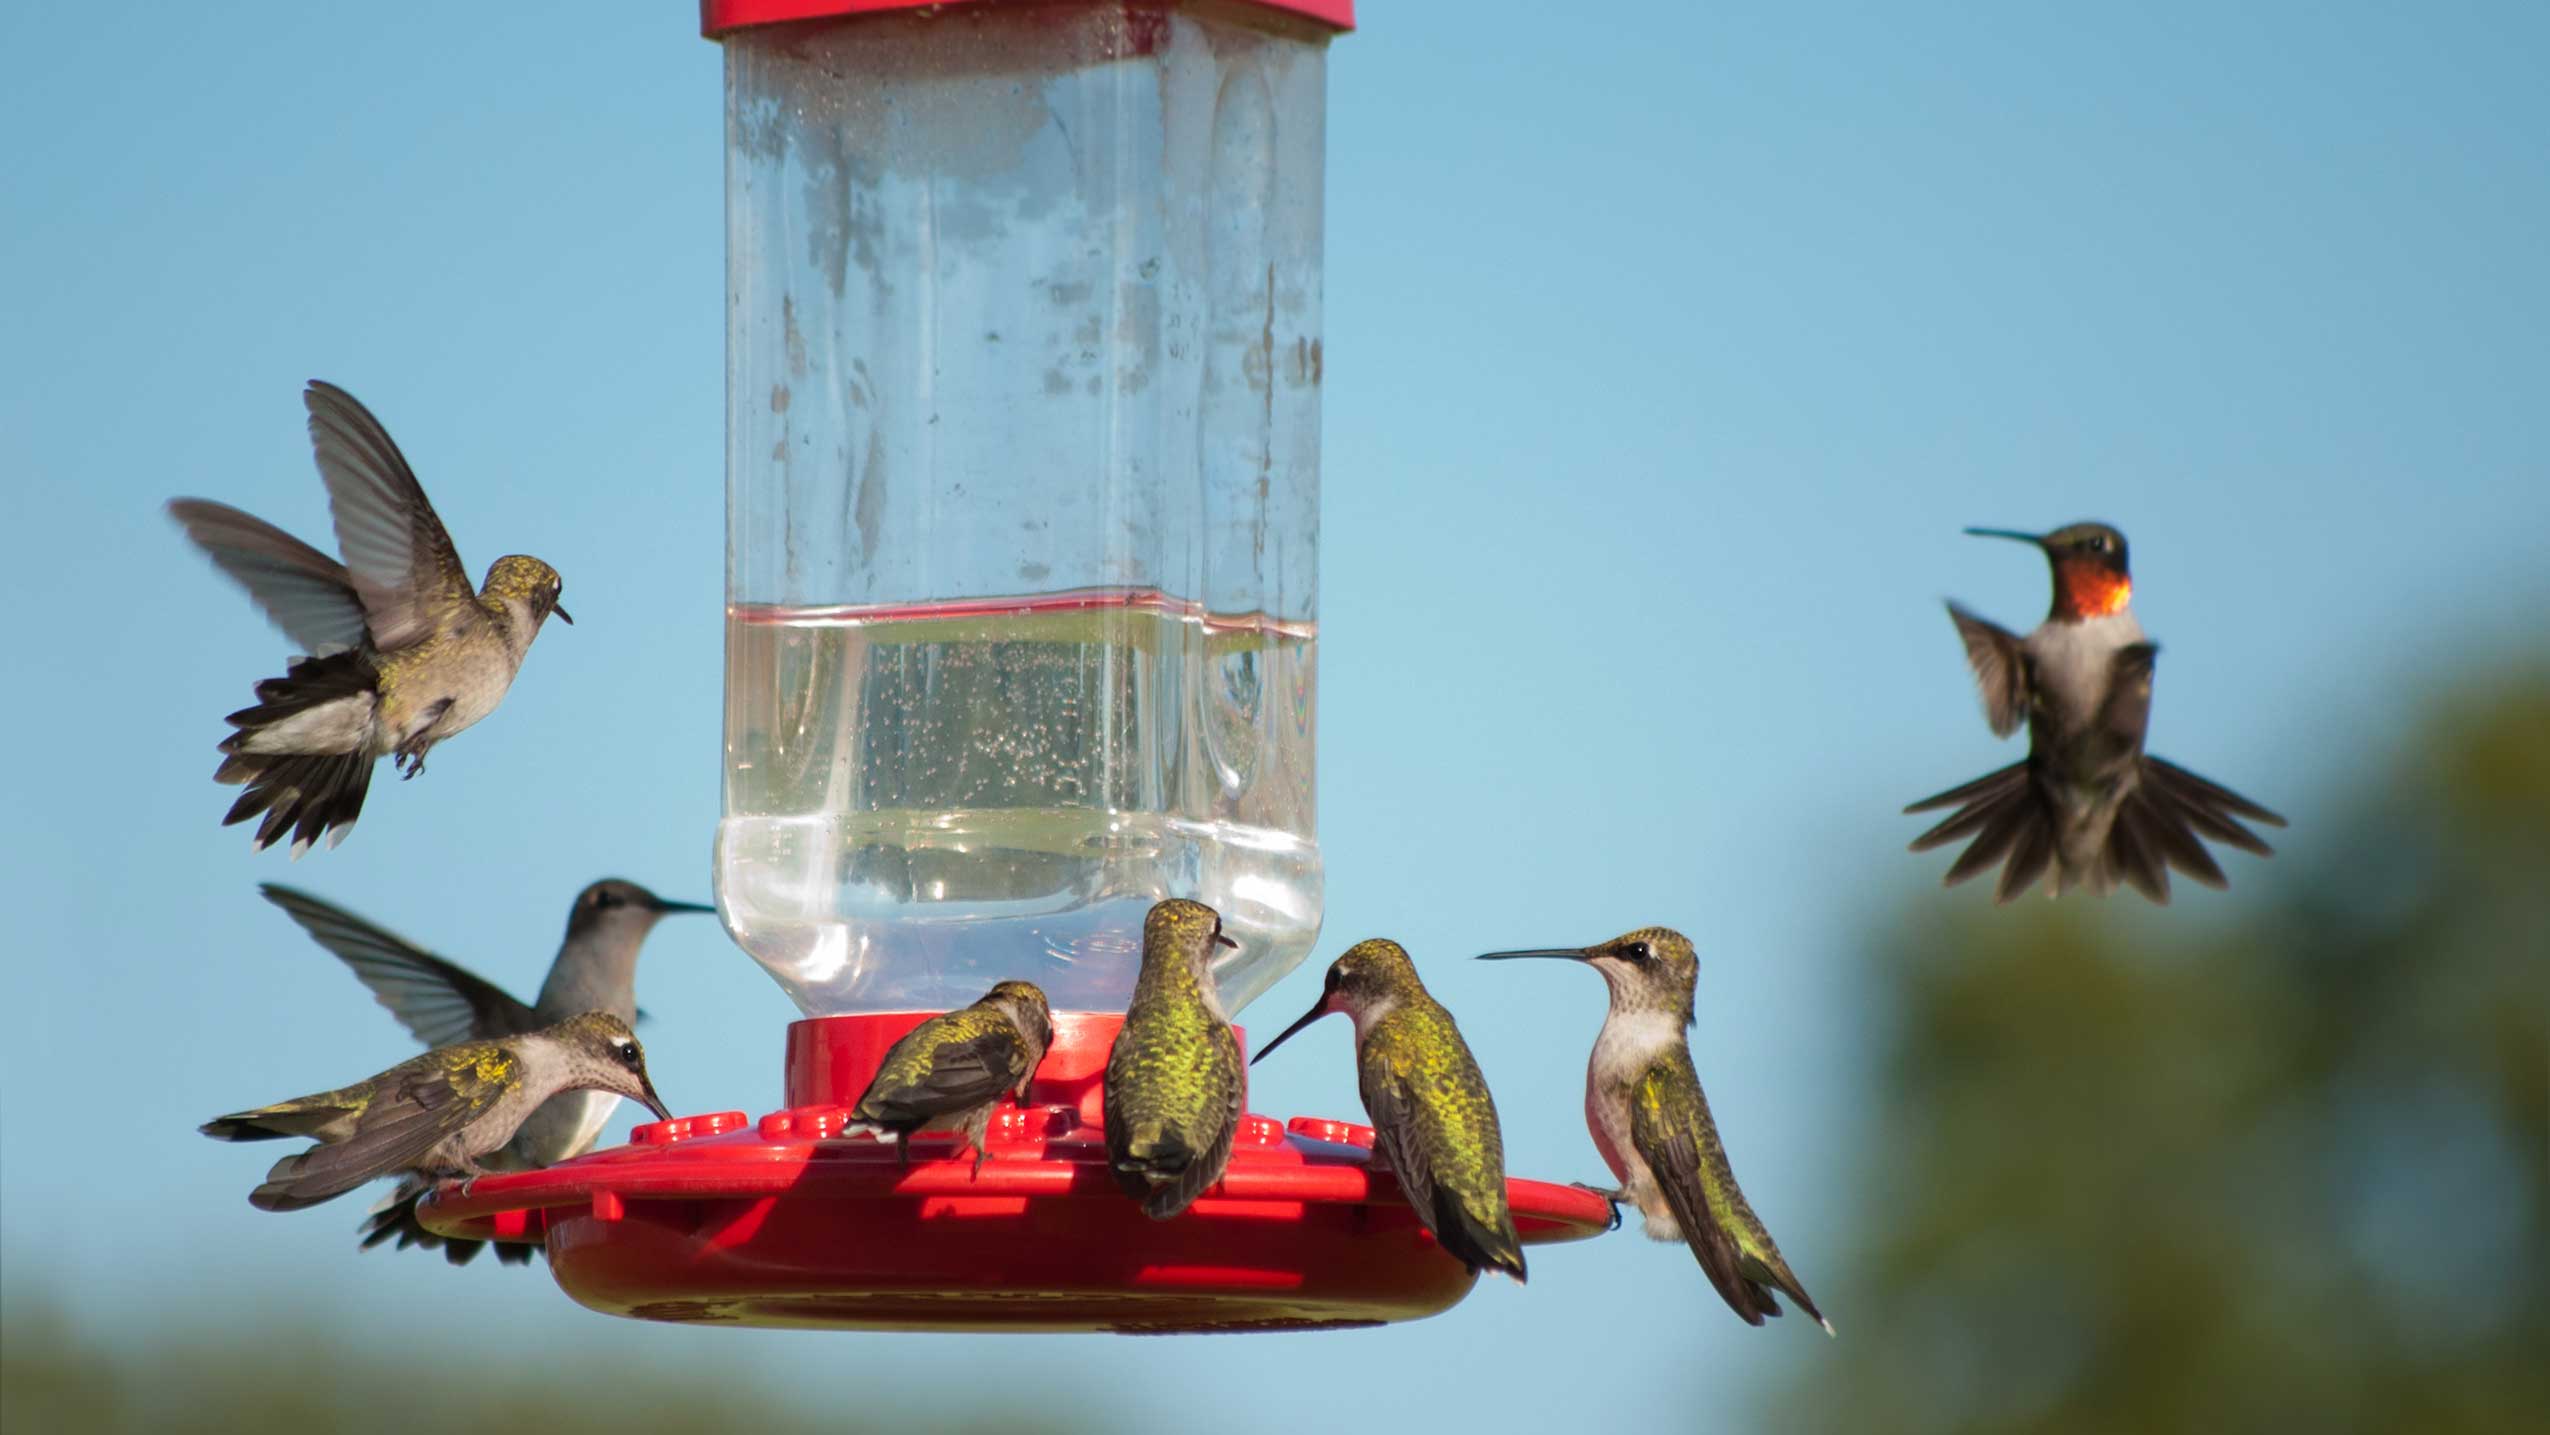 A group of hummingbirds at a feeder.